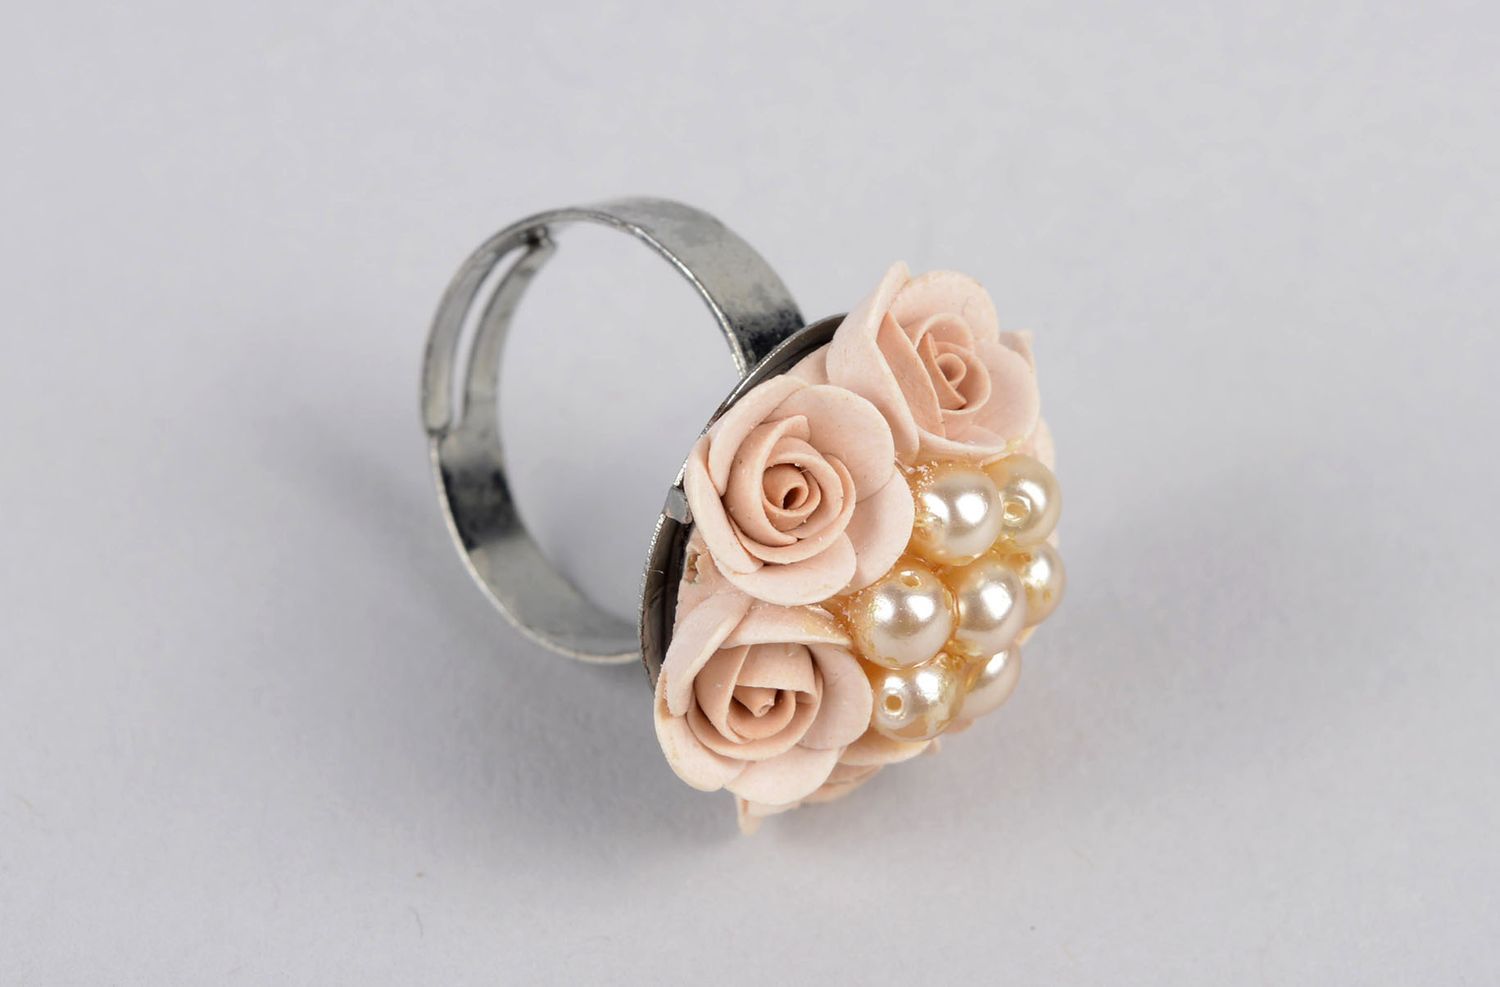 Handmade polymer clay ring volume ring with roses flower ring designer jewelry photo 4